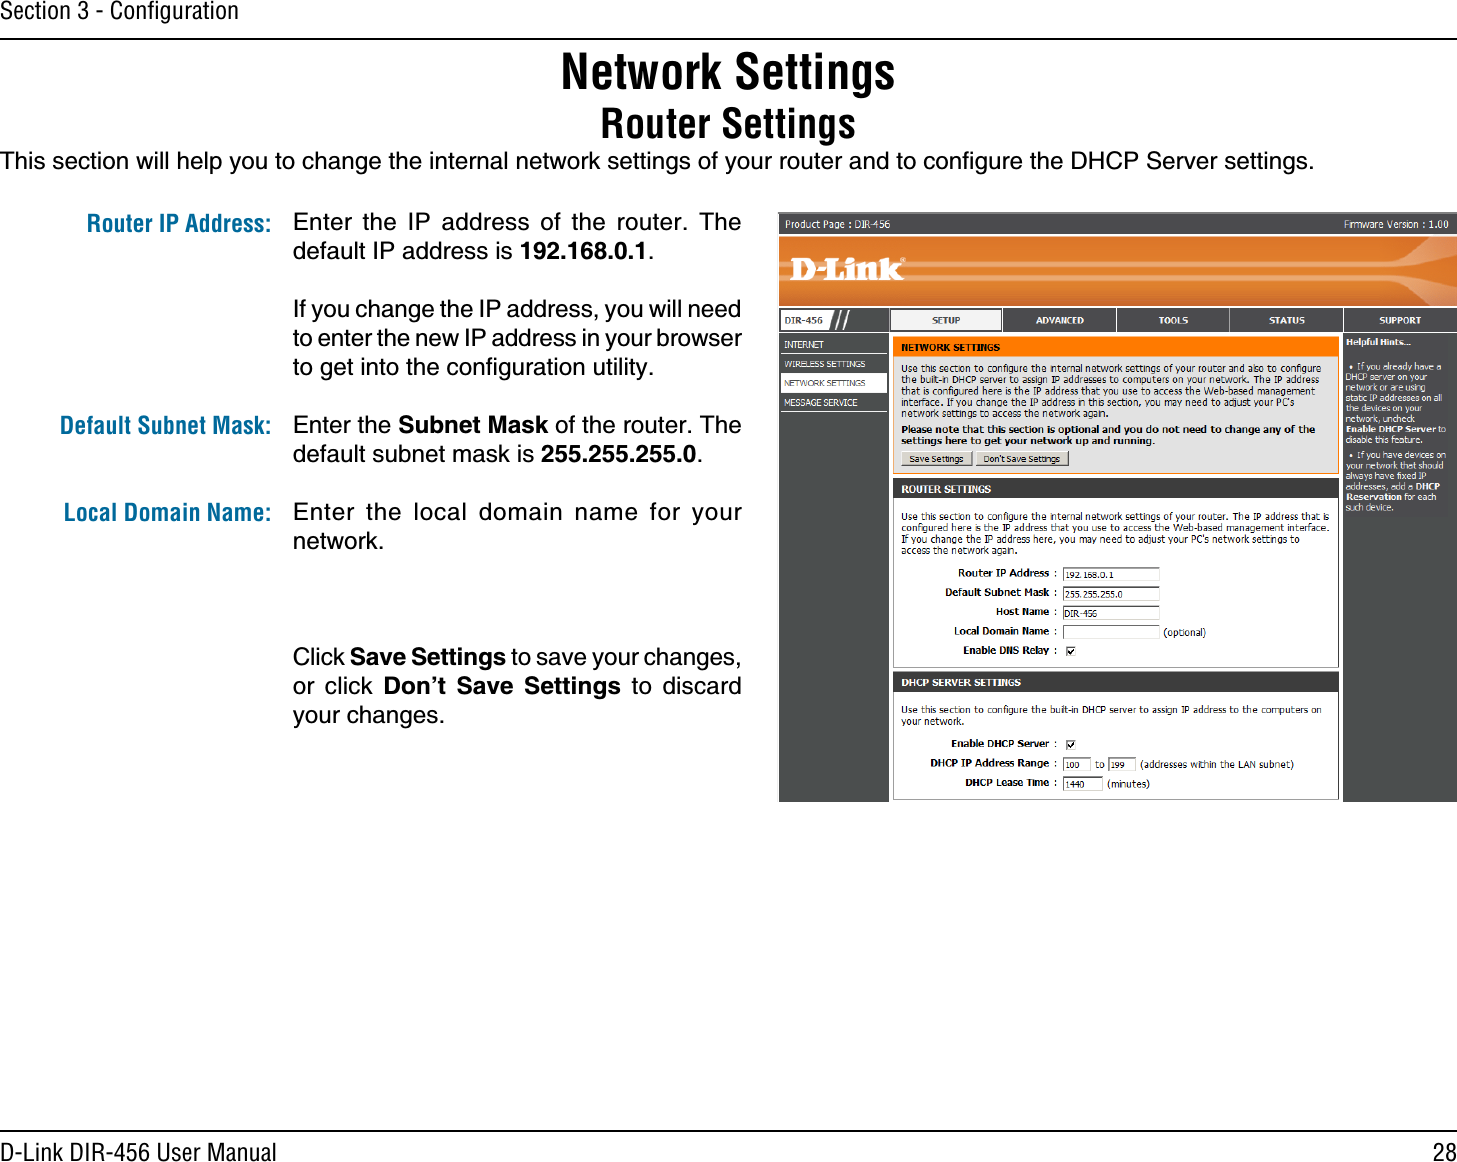 28D-Link DIR-456 User ManualSection 3 - ConﬁgurationThis section will help you to change the internal network settings of your router and to conﬁgure the DHCP Server settings. Network SettingsRouter SettingsEnter the IP address of the router. The default IP address is 192.168.0.1.If you change the IP address, you will need to enter the new IP address in your browser to get into the conﬁguration utility.Enter the Subnet Mask of the router. The default subnet mask is 255.255.255.0.Enter the local domain name for your network.Click Save Settings to save your changes, or click Don’t Save Settings to discard your changes.Router IP Address: Default Subnet Mask: Local Domain Name: 